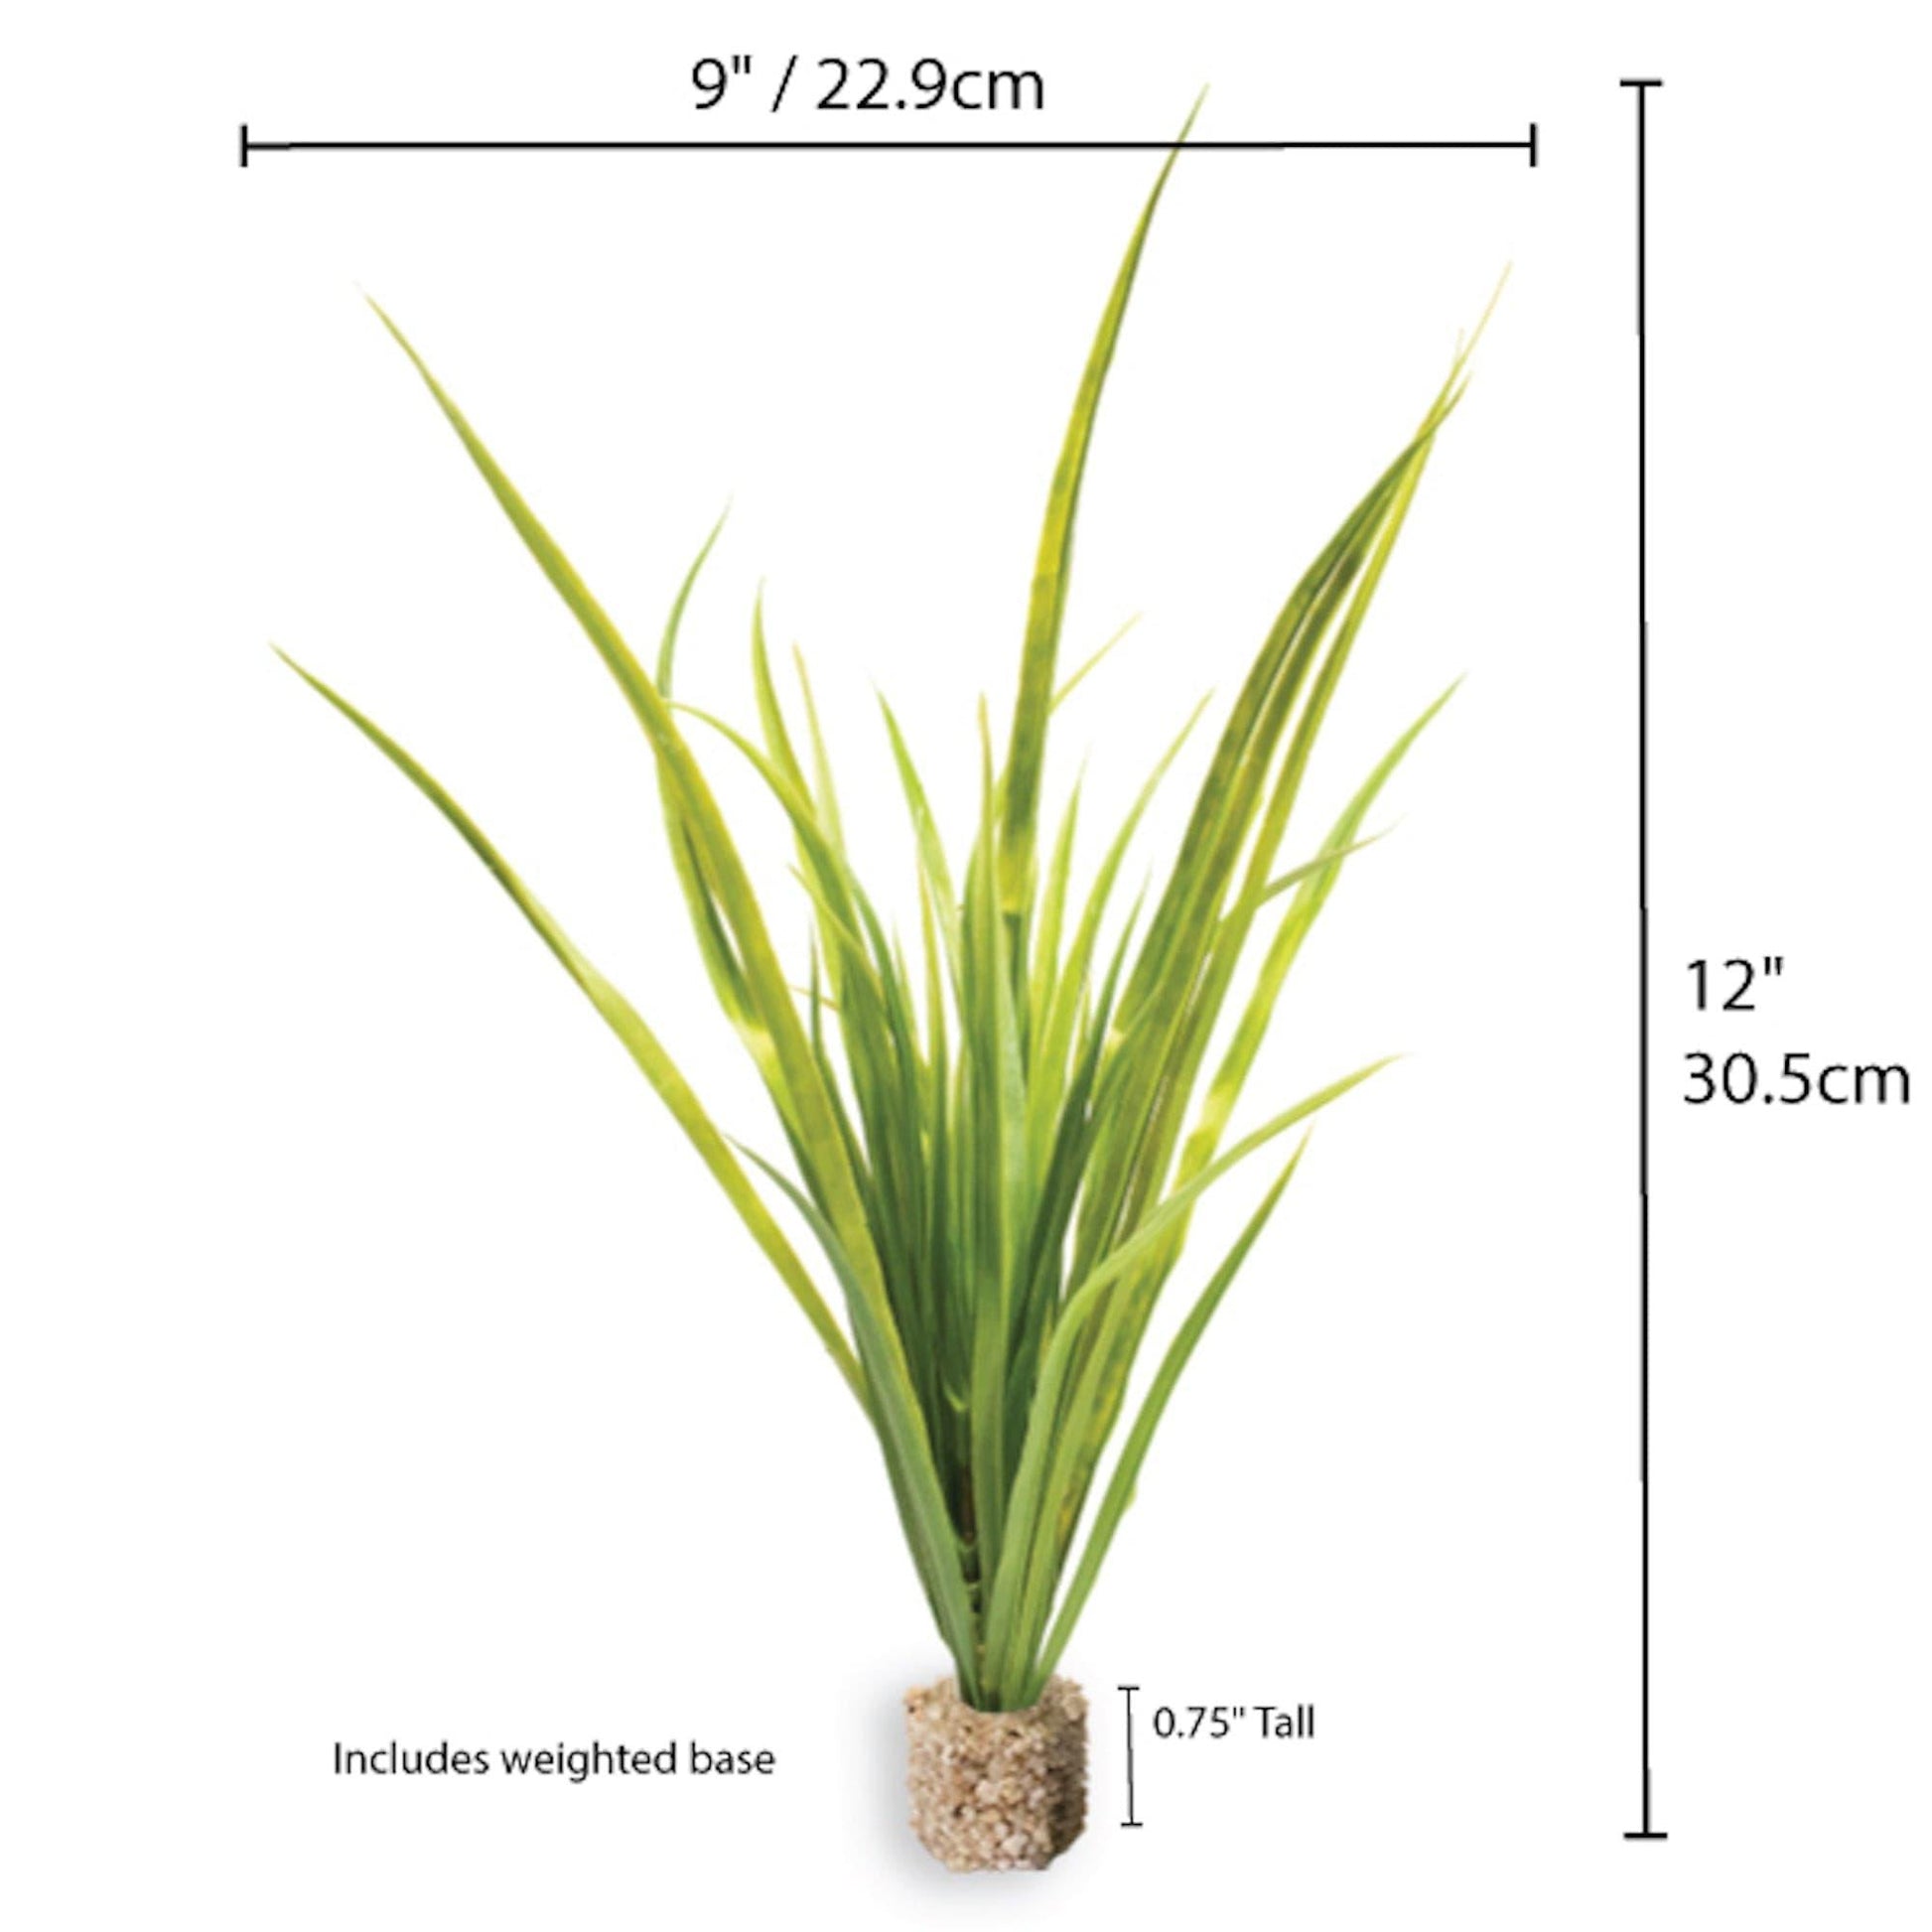 Fountain Grass Medium Green with Weighted Base.